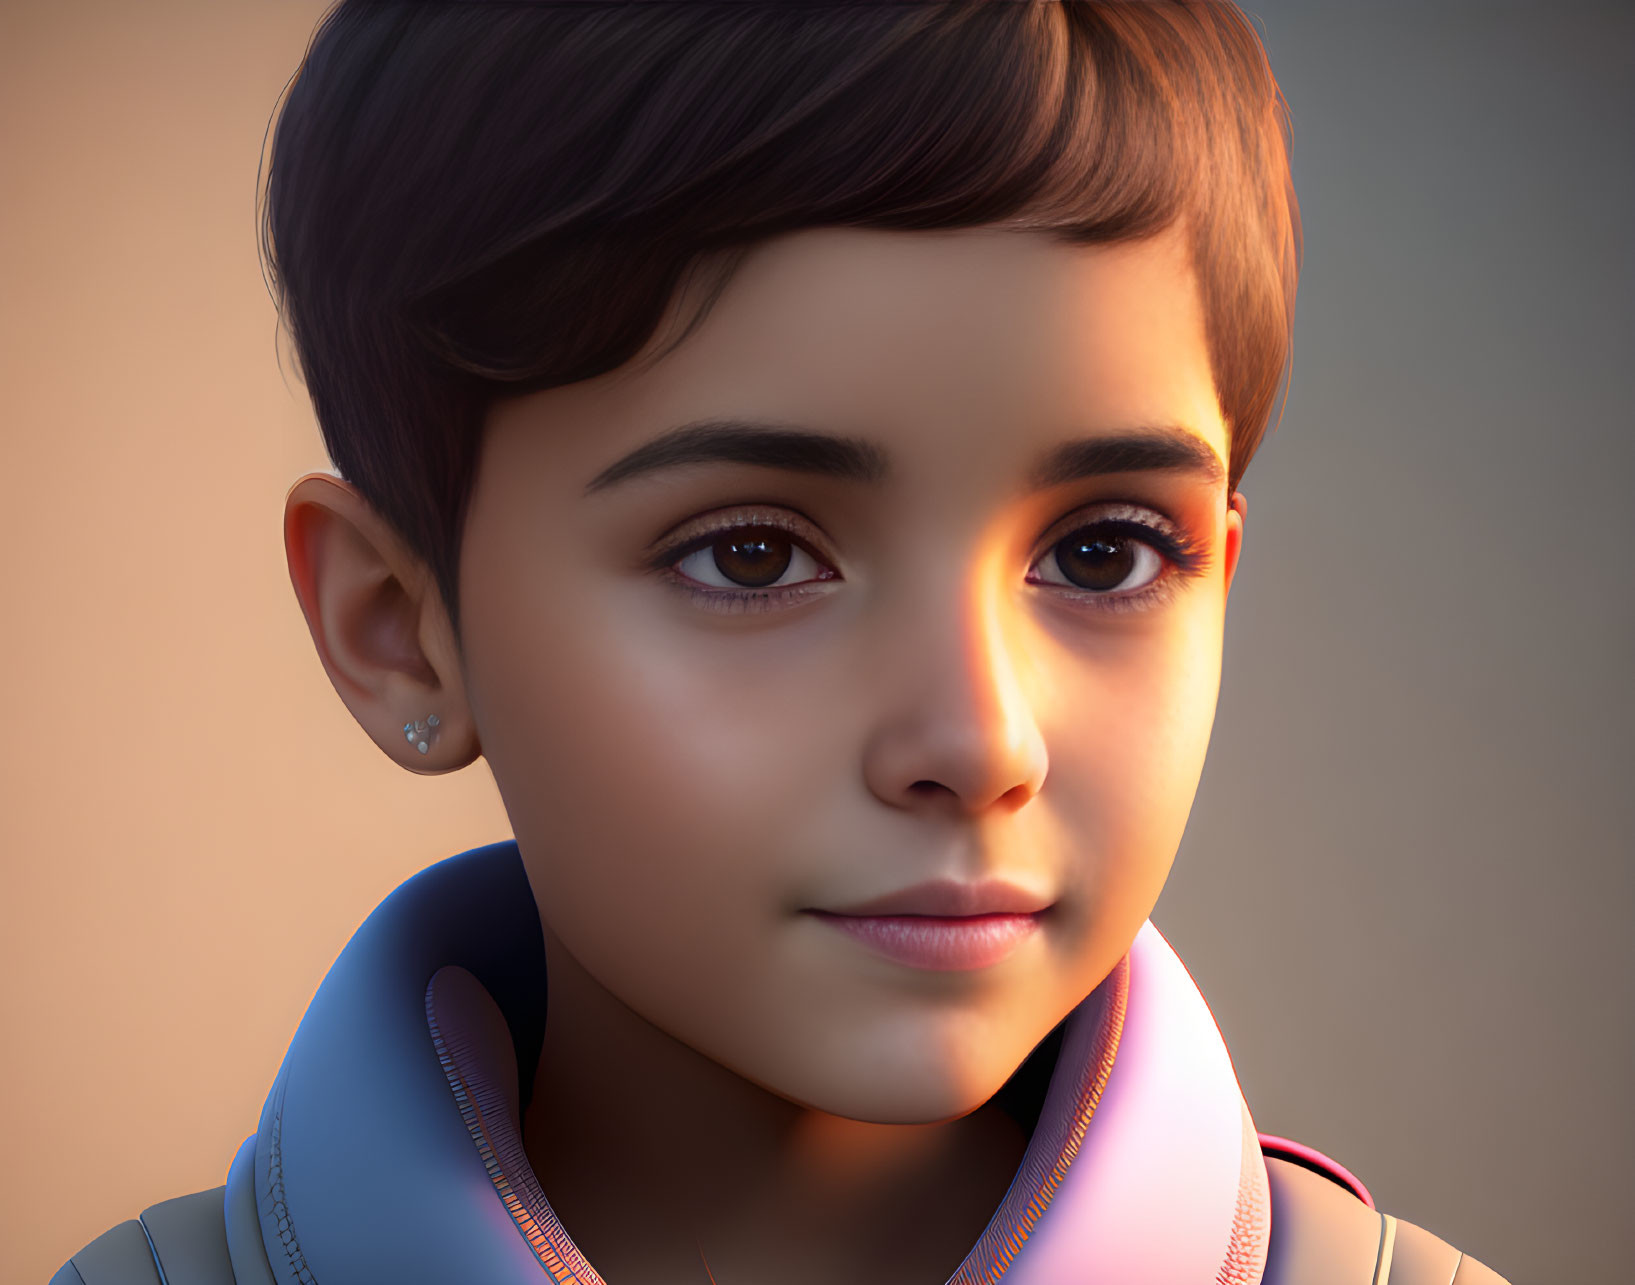 Young Child 3D Rendering: Brown Eyes, Short Hair, Collar Jacket